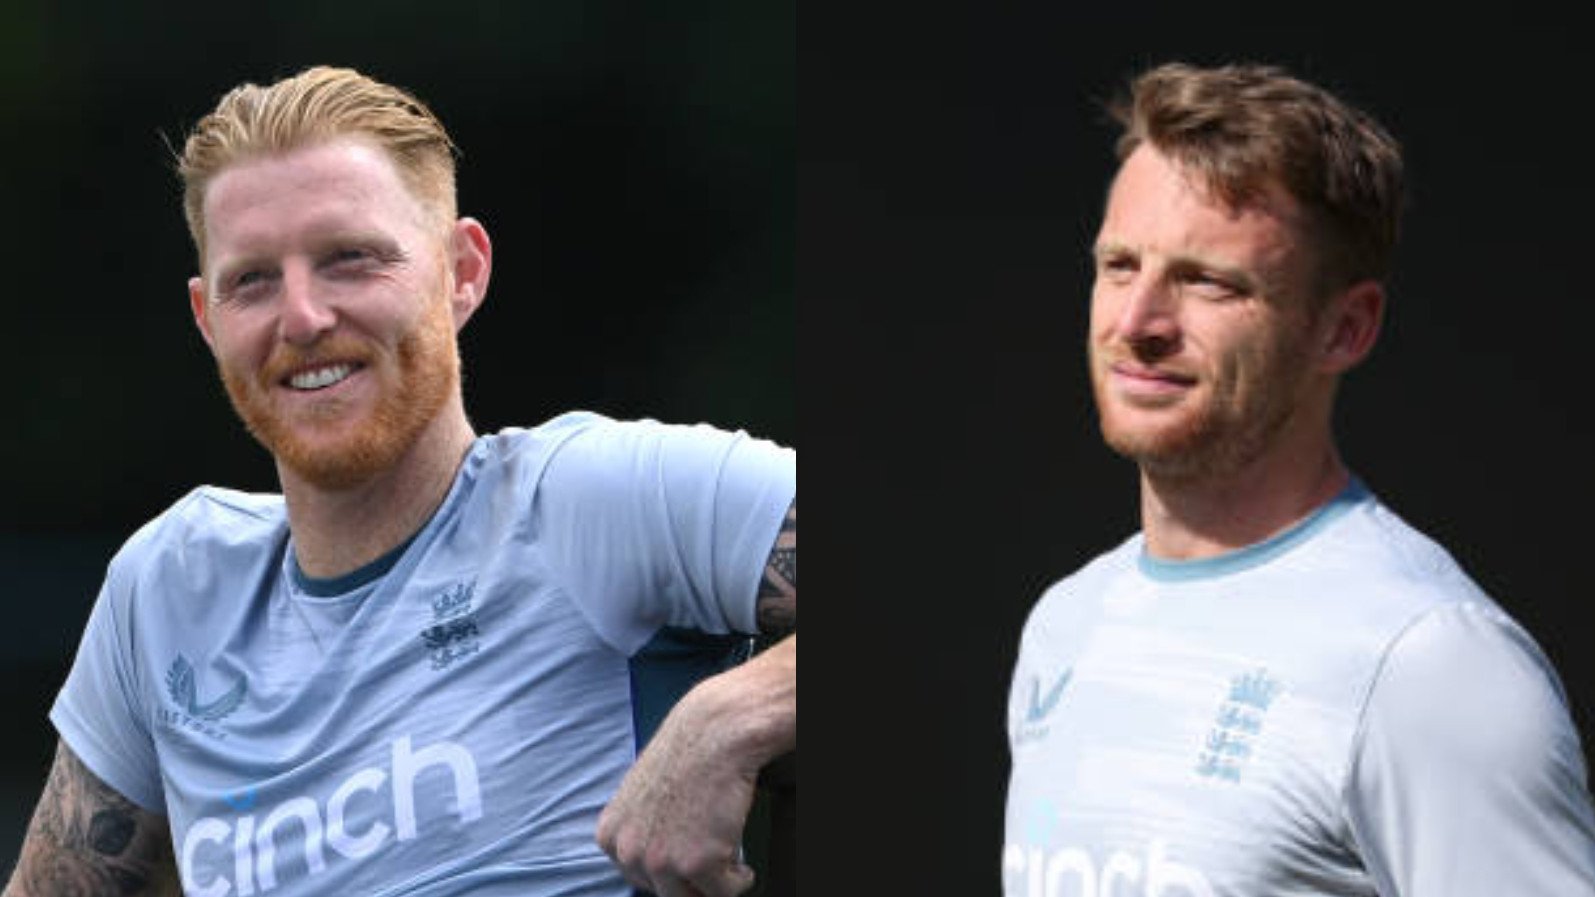 'He was the obvious choice' - Ben Stokes on Jos Buttler becoming England's new white-ball captain